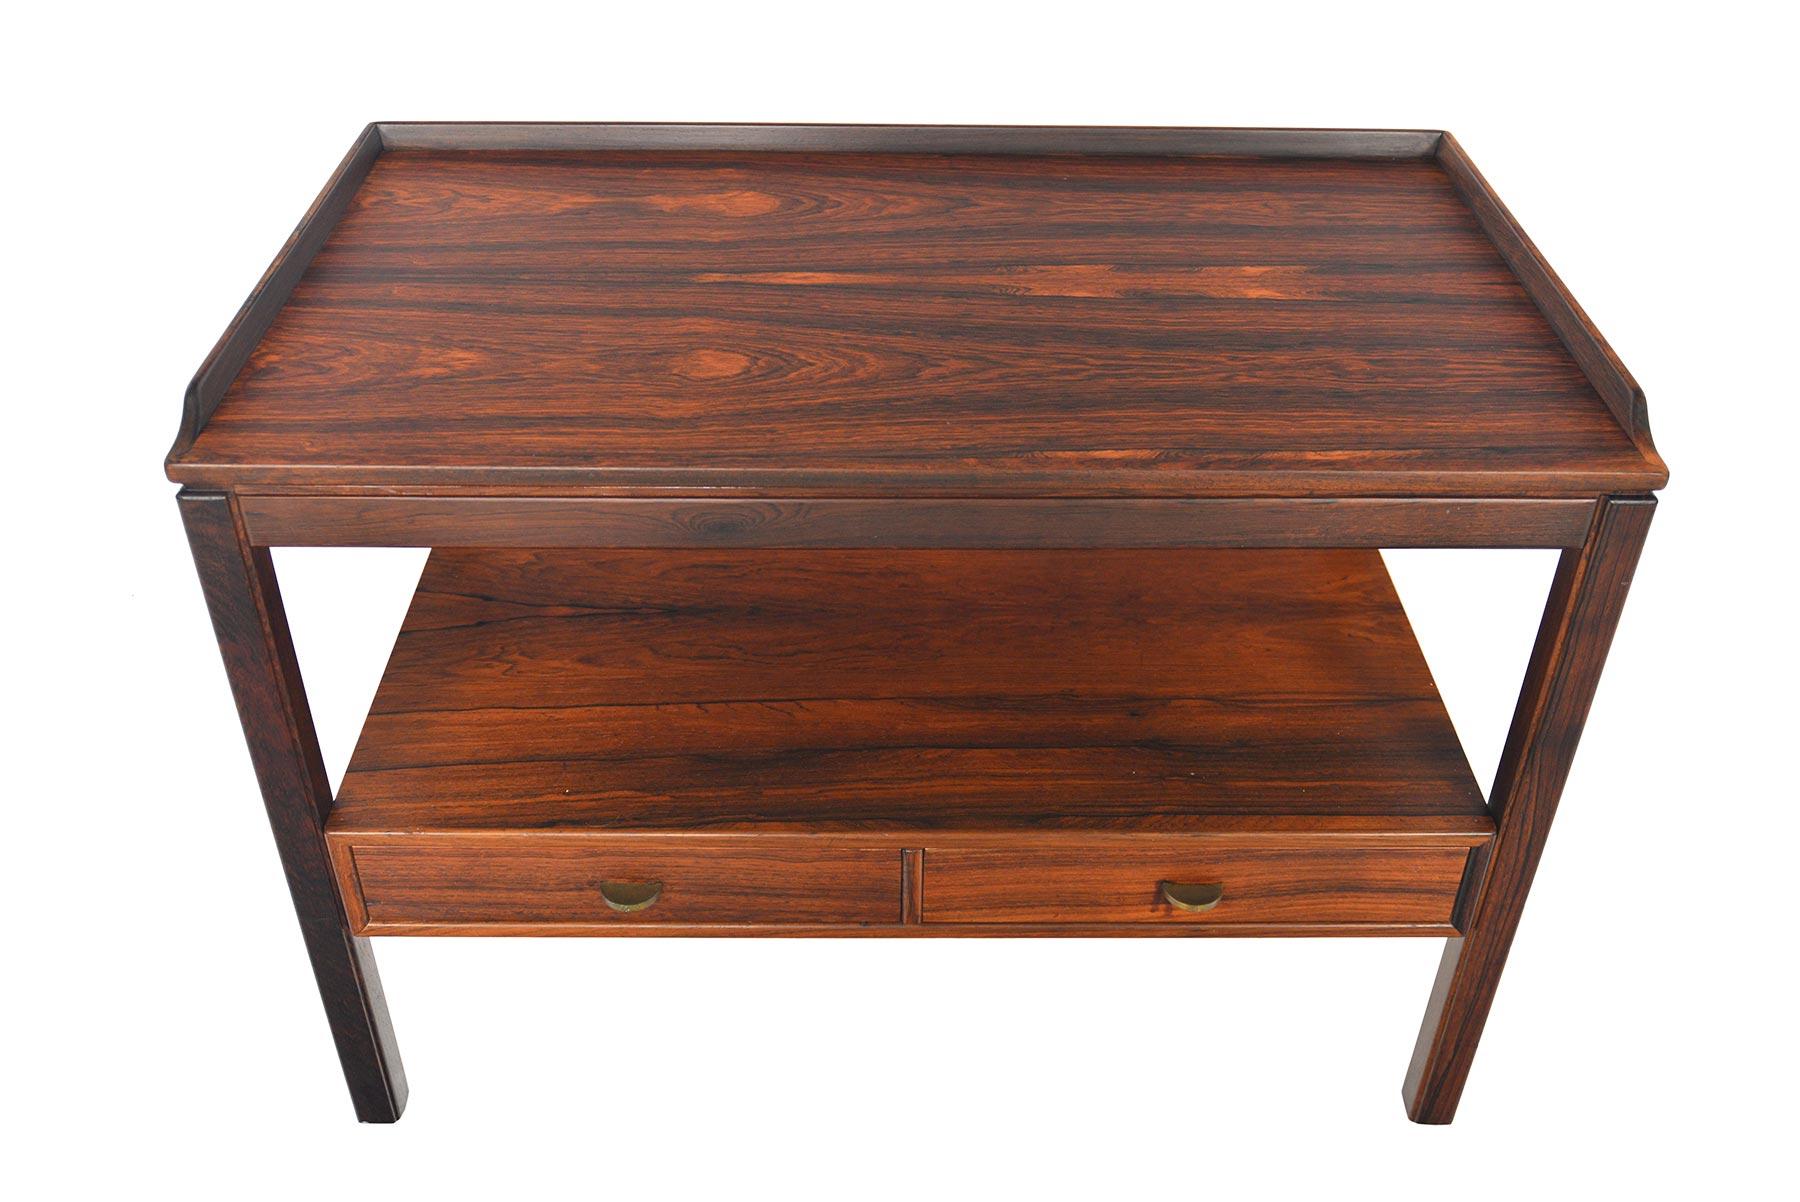 This stunning Swedish modern console table in Brazilian rosewood was designed by Sven Engström & Gunnar Myrstrand for Tingströms, Bra Bohag in the 1960s. Table features a raised lip and two lower drawers for additional storage. In excellent original